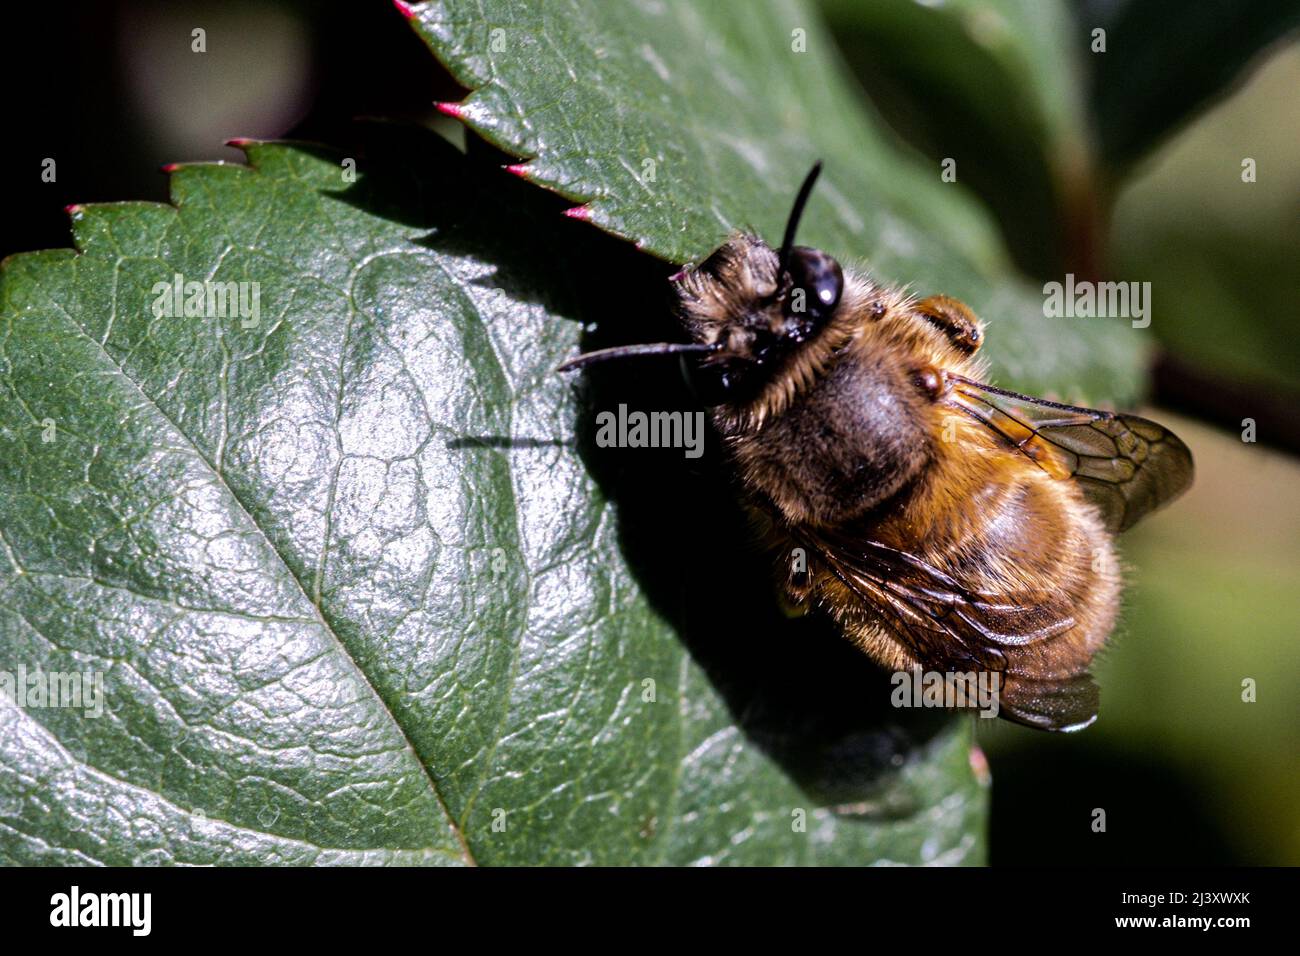 a bee perched on a leaf, macro photo Stock Photo